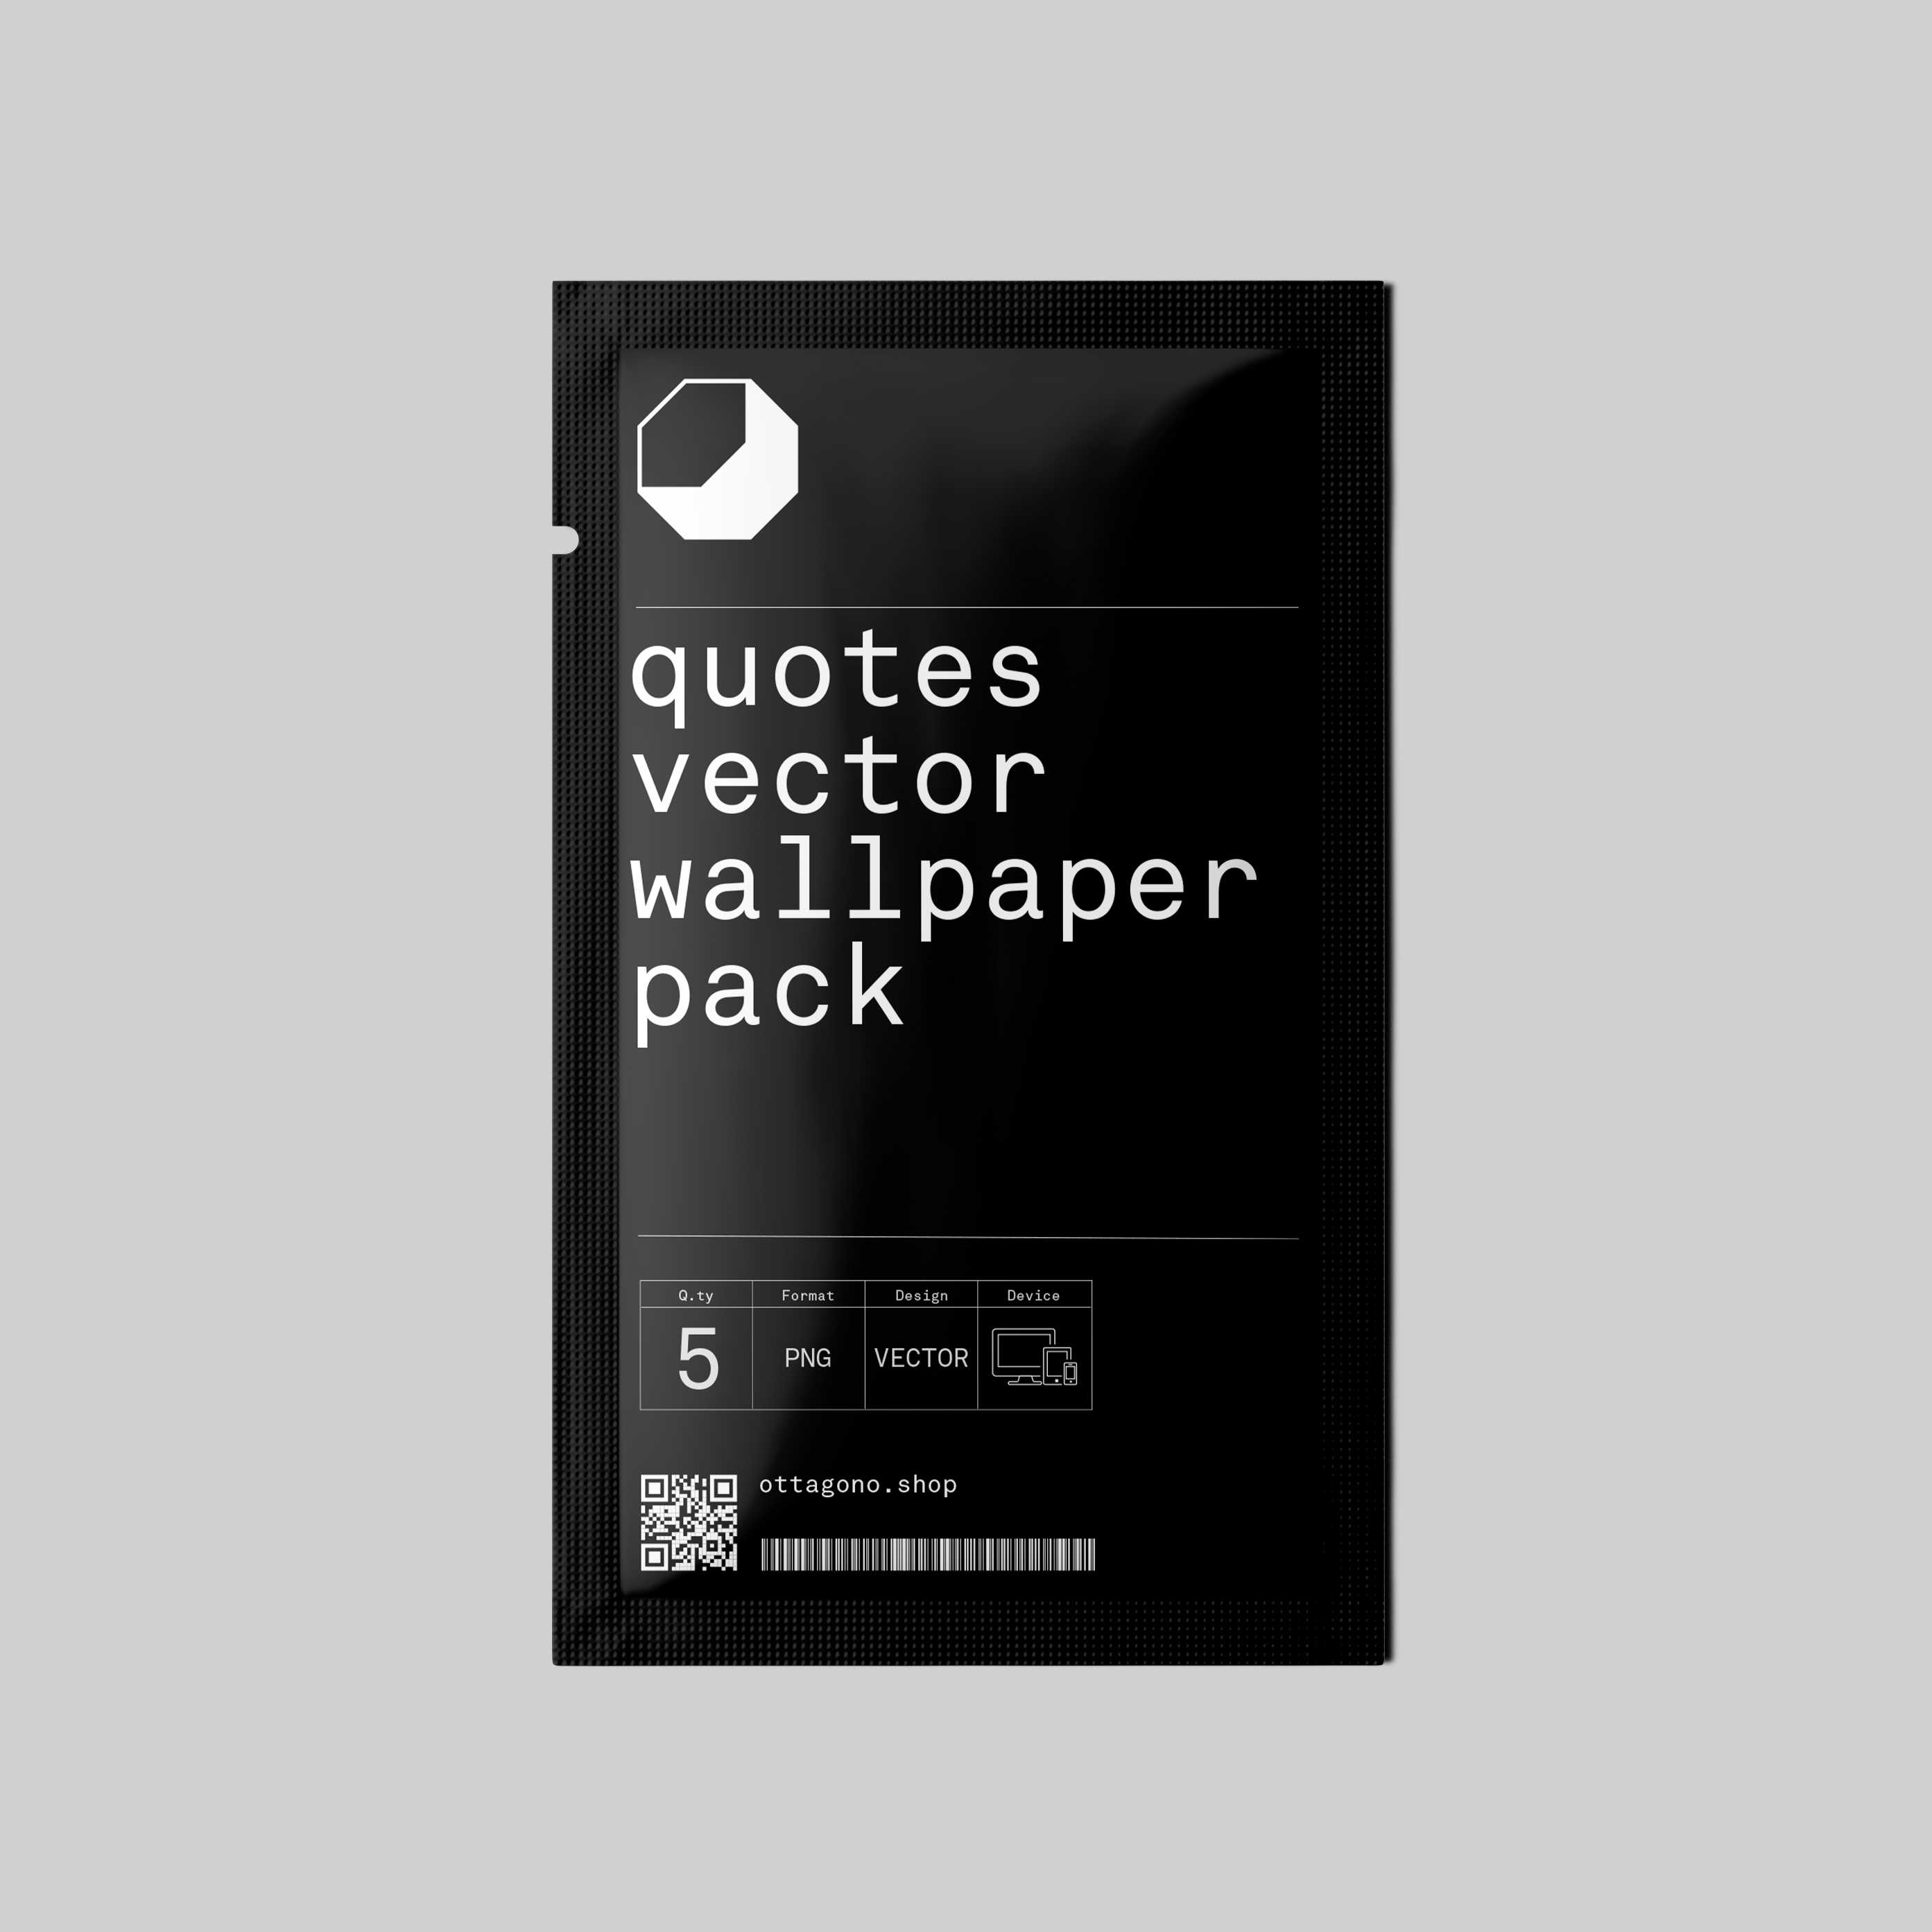 Quotes wallpaper pack